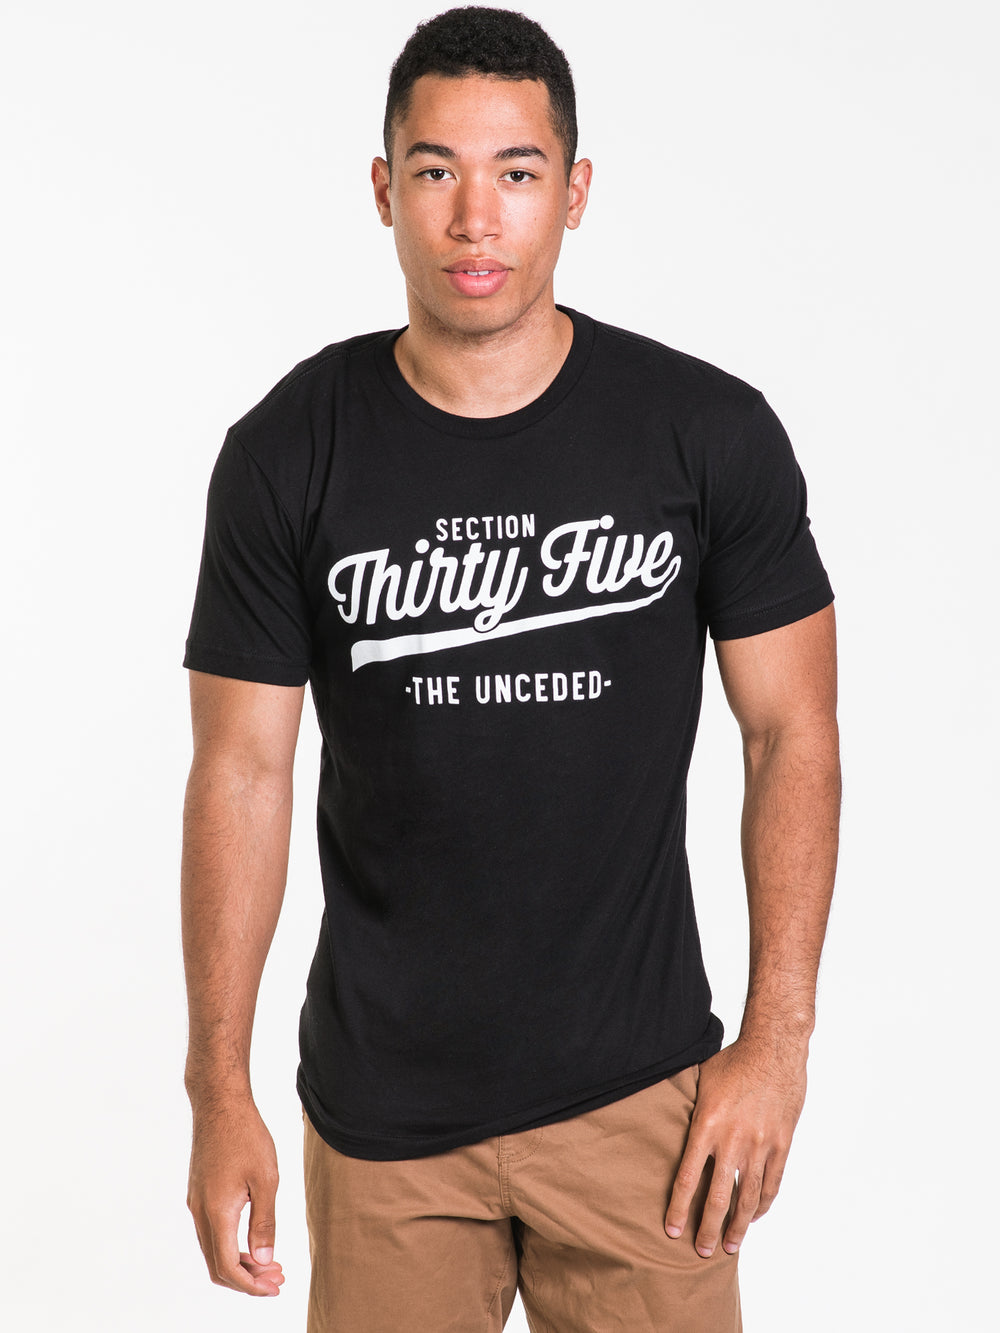 SECTION 35 THE UNCEDED SCRIPT T-SHIRT  - CLEARANCE